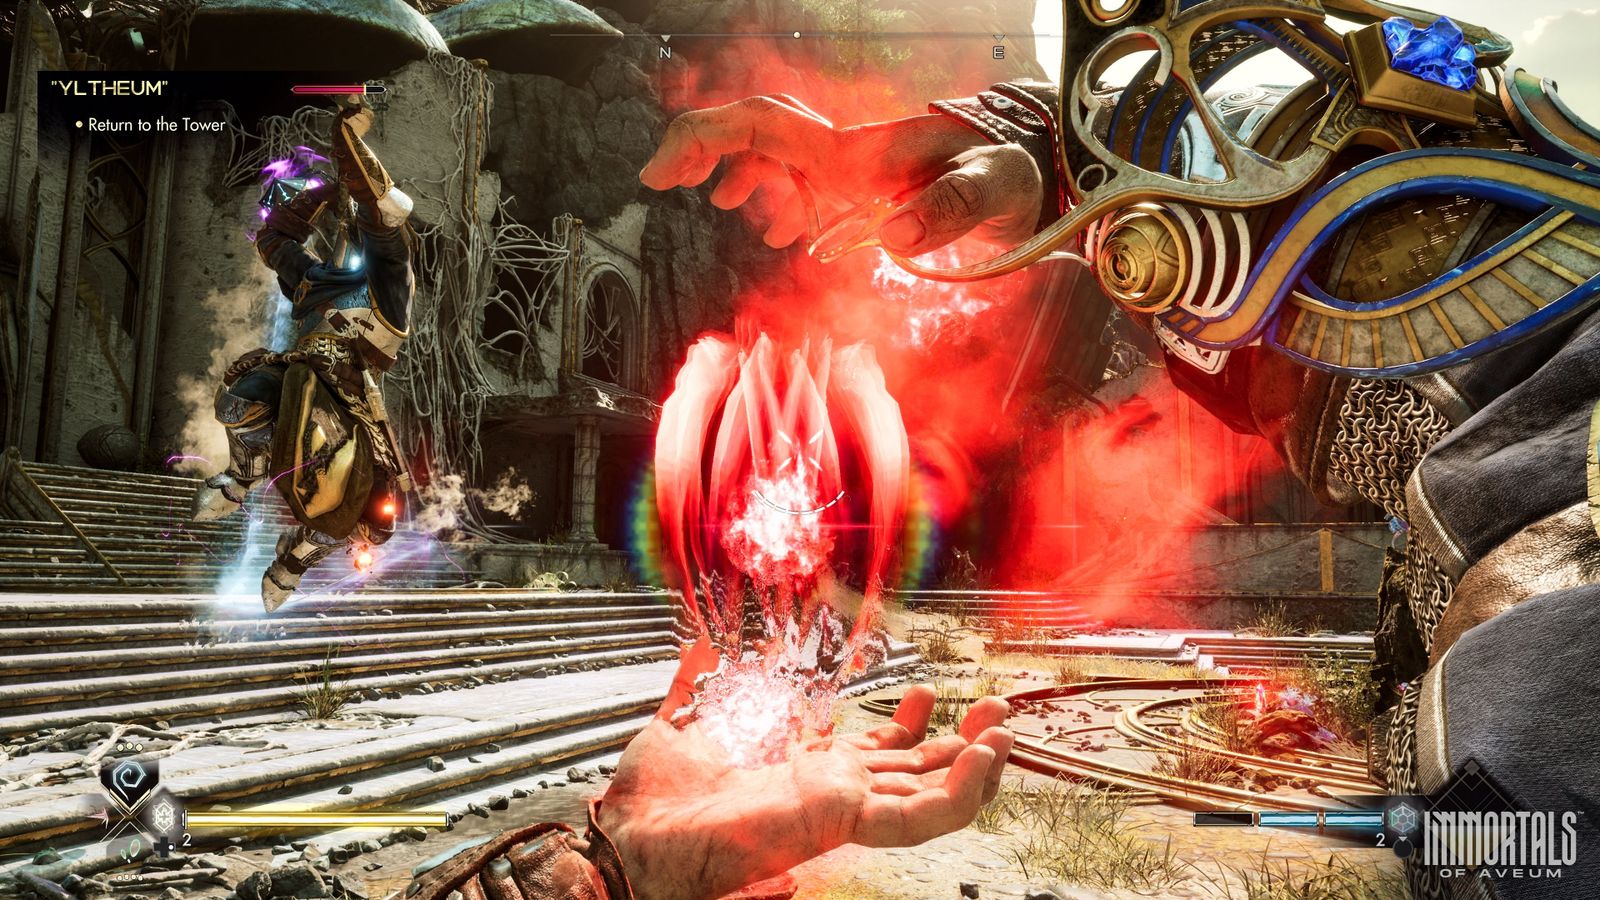 In-game footage from Immortals of Aveum showing Jak casting a spell with red magic